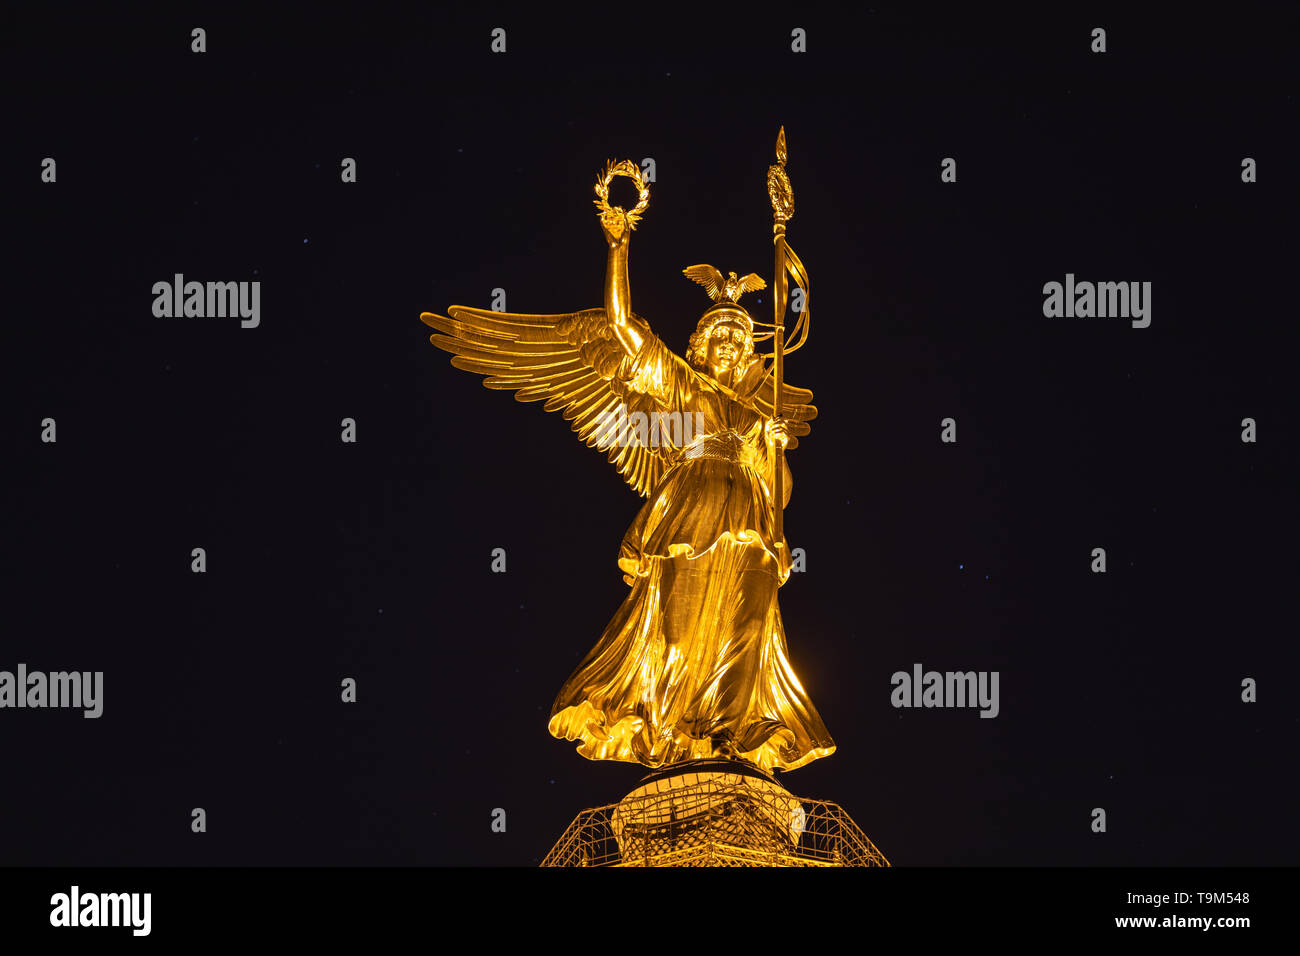 Night view of the golden statue of Victoria on top of the Victory Column, located at Great Star square in Berlin, Germany Stock Photo